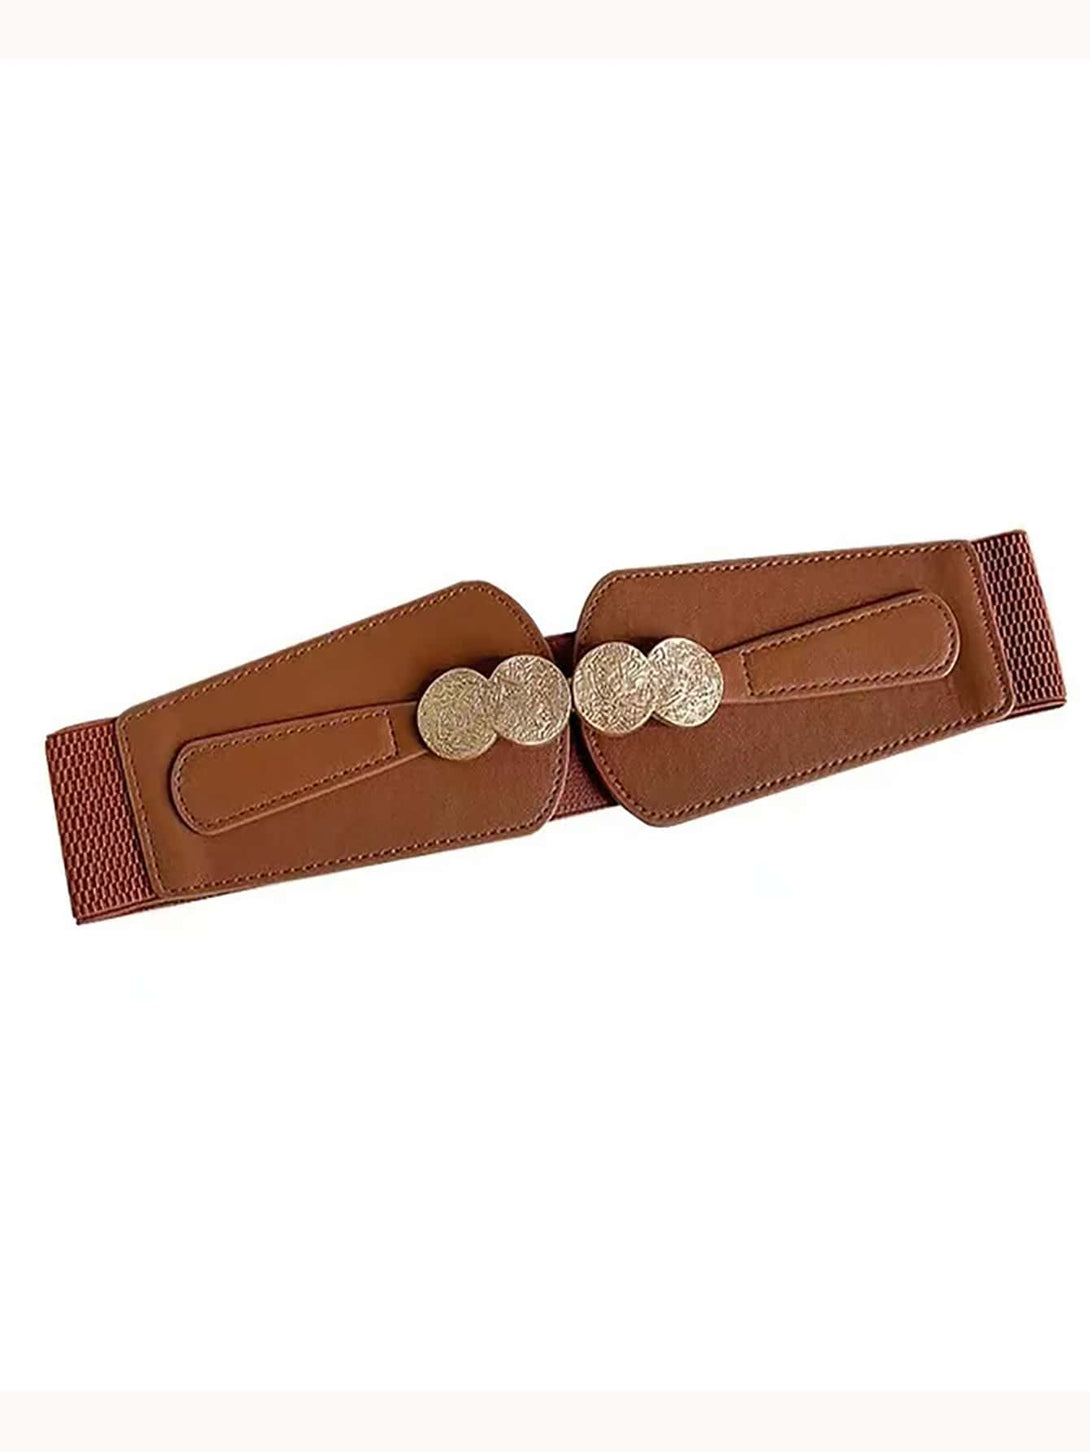 1pc Brown Women Textured Symmetrical Buckle Casual Elastic Belt For Daily Decoration - Negative Apparel